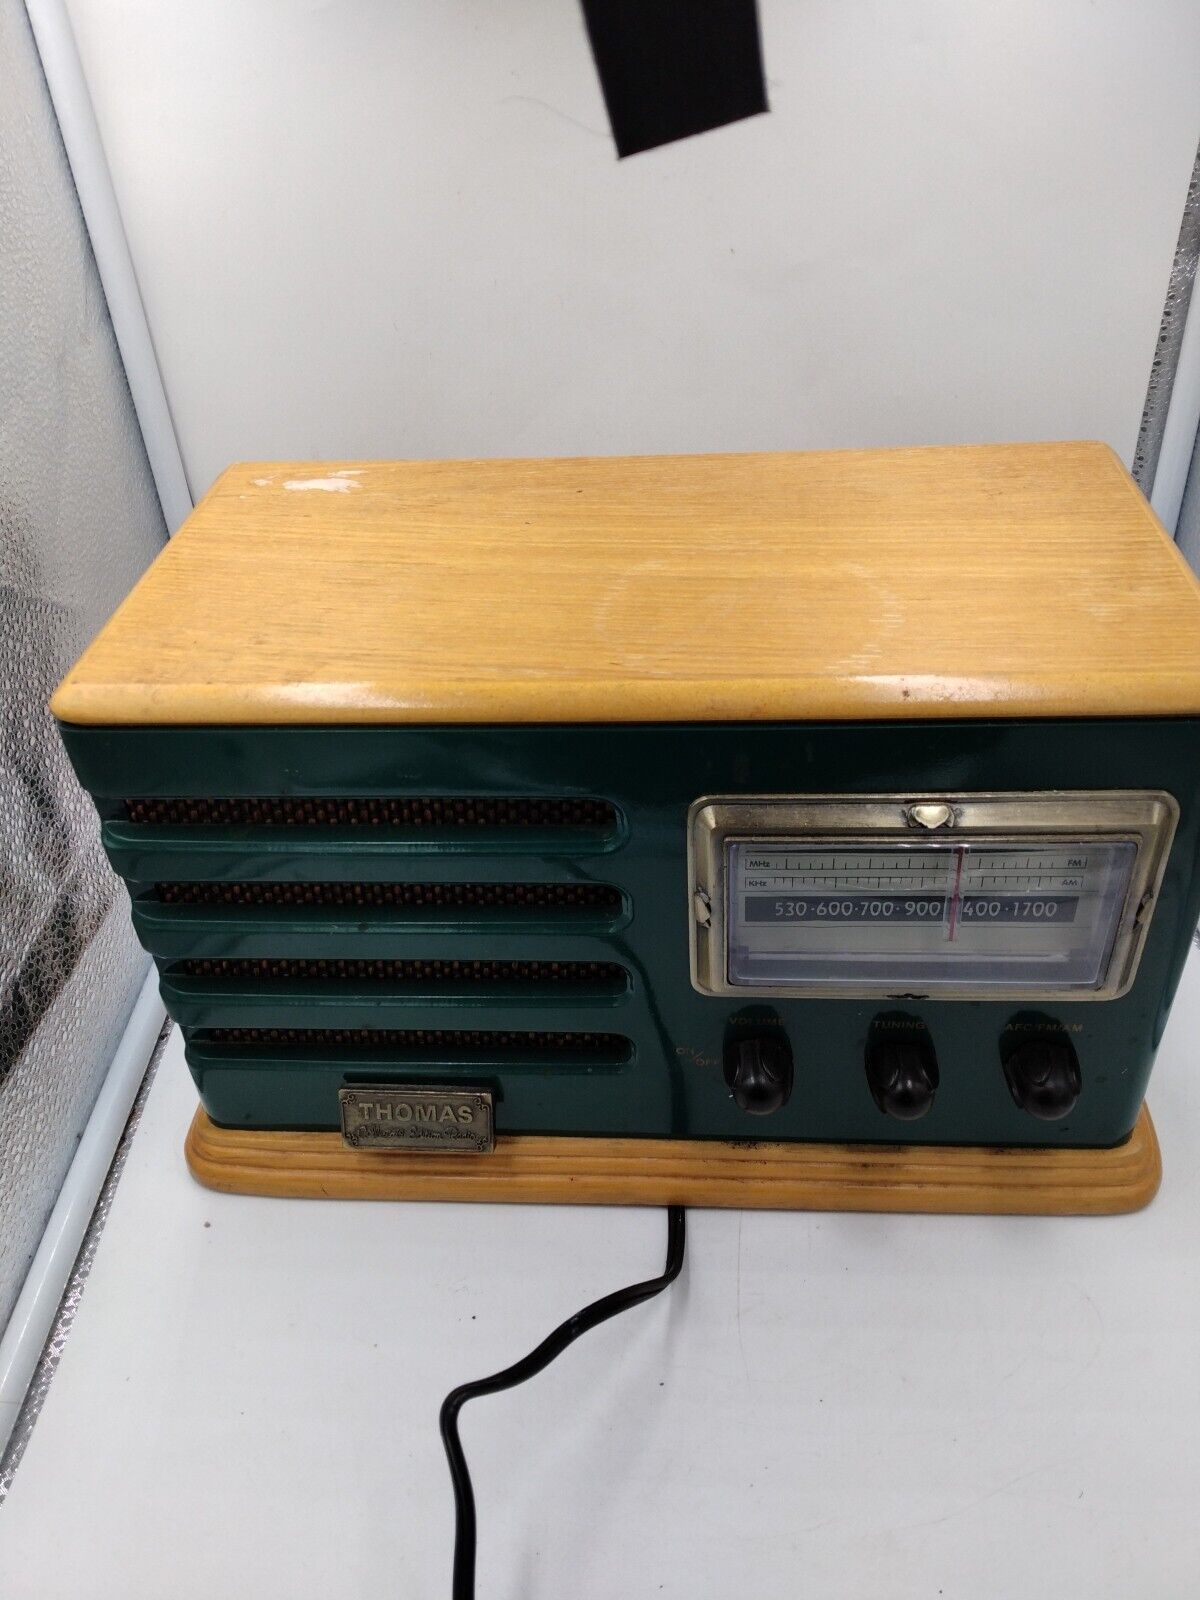 Rare Thomas Collector's Edition Radio model 1949 Look like Notre Dame colors